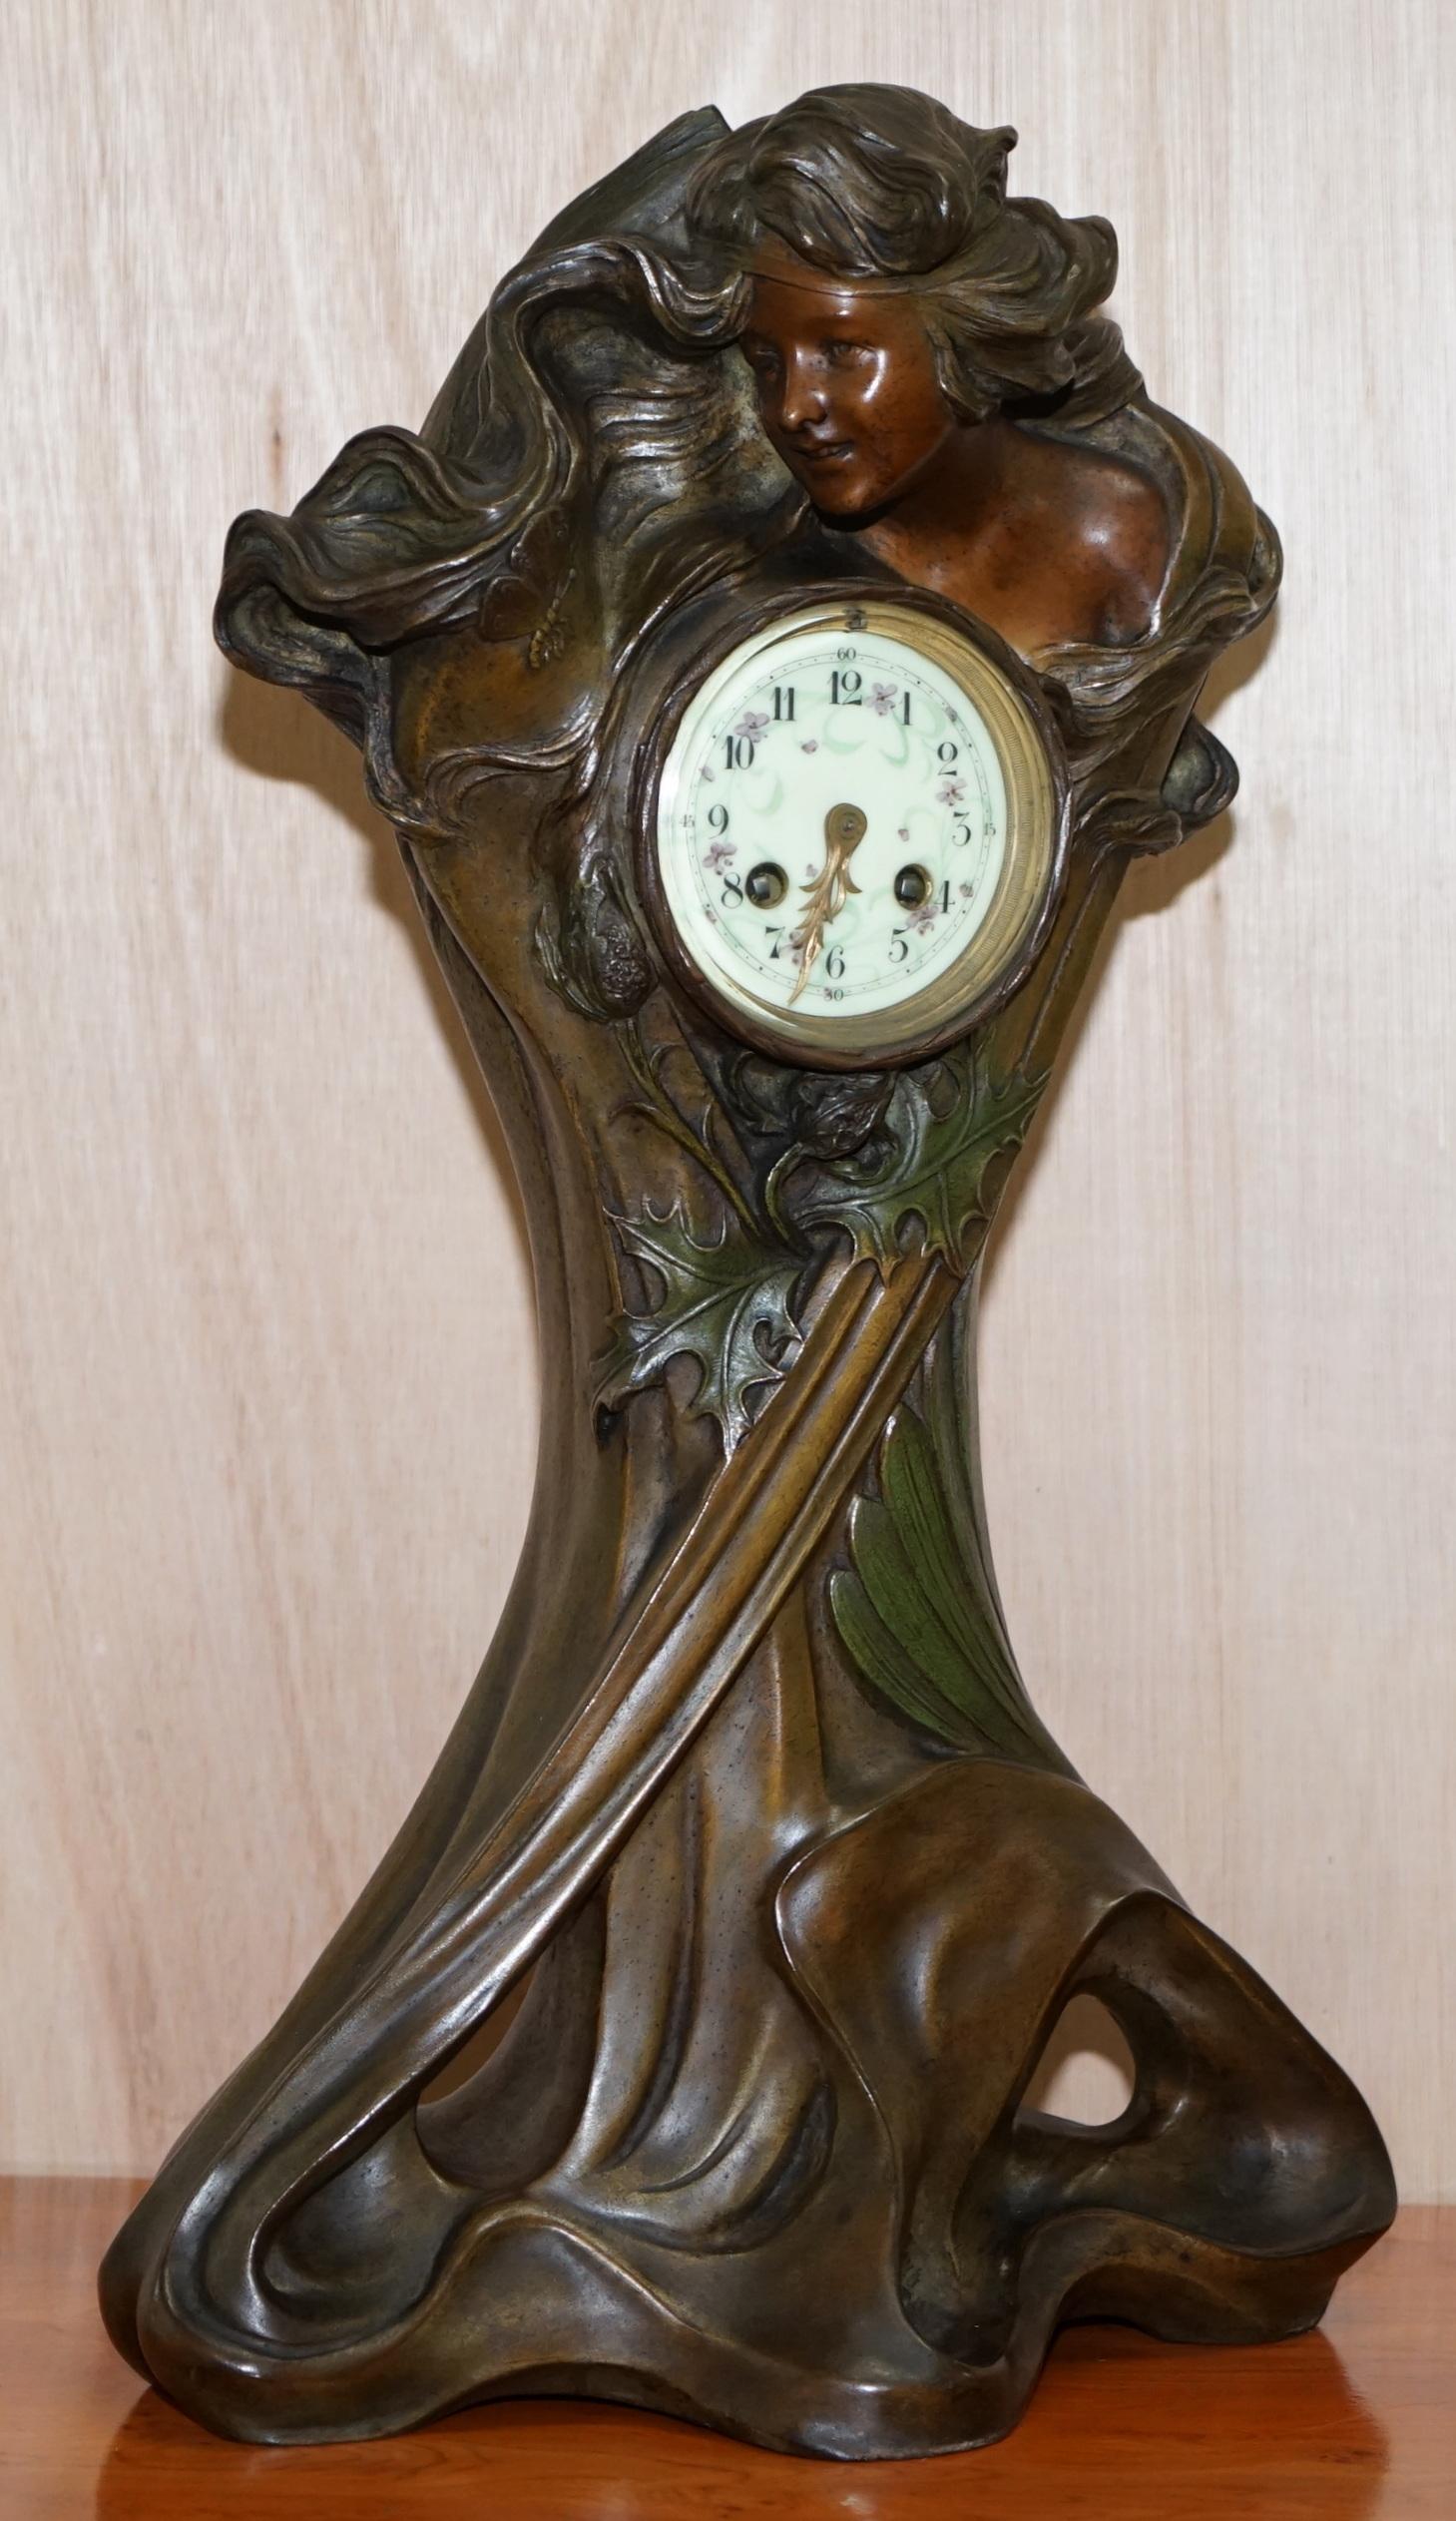 We are delighted to this absolutely stunning and really very large Art Nouveau mantle clock circa 1890 by the great Seth Thomas

This clock is huge, I bought it thinking it was a normal size when in fact its nearly as tall as two normal bottles of